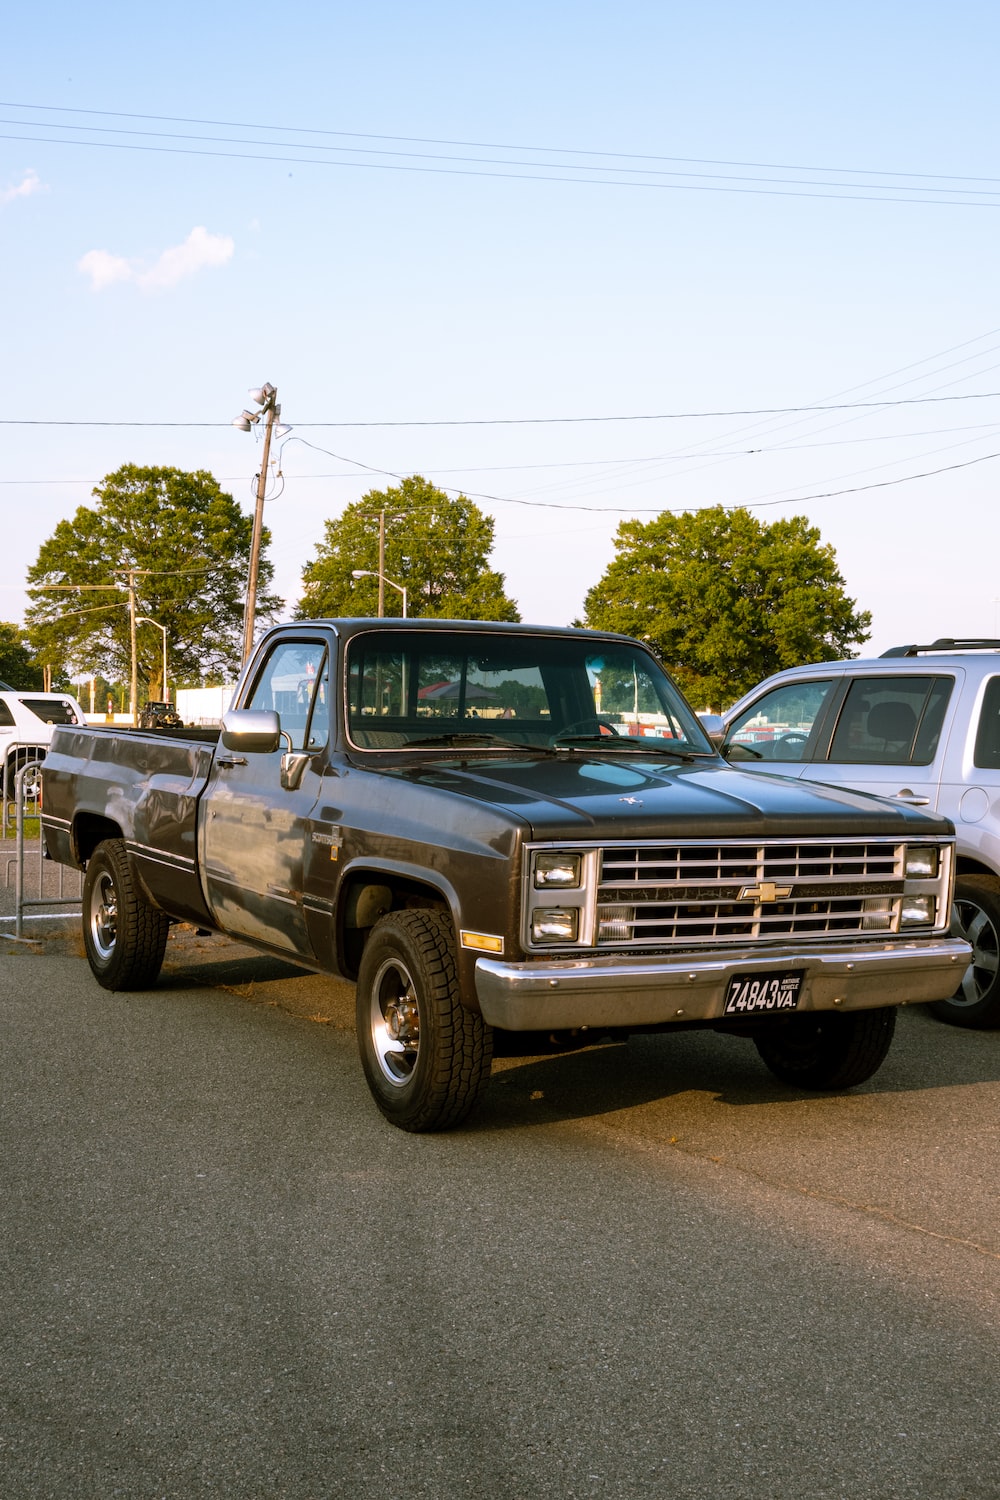 Chevy Truck Picture. Download Free Image